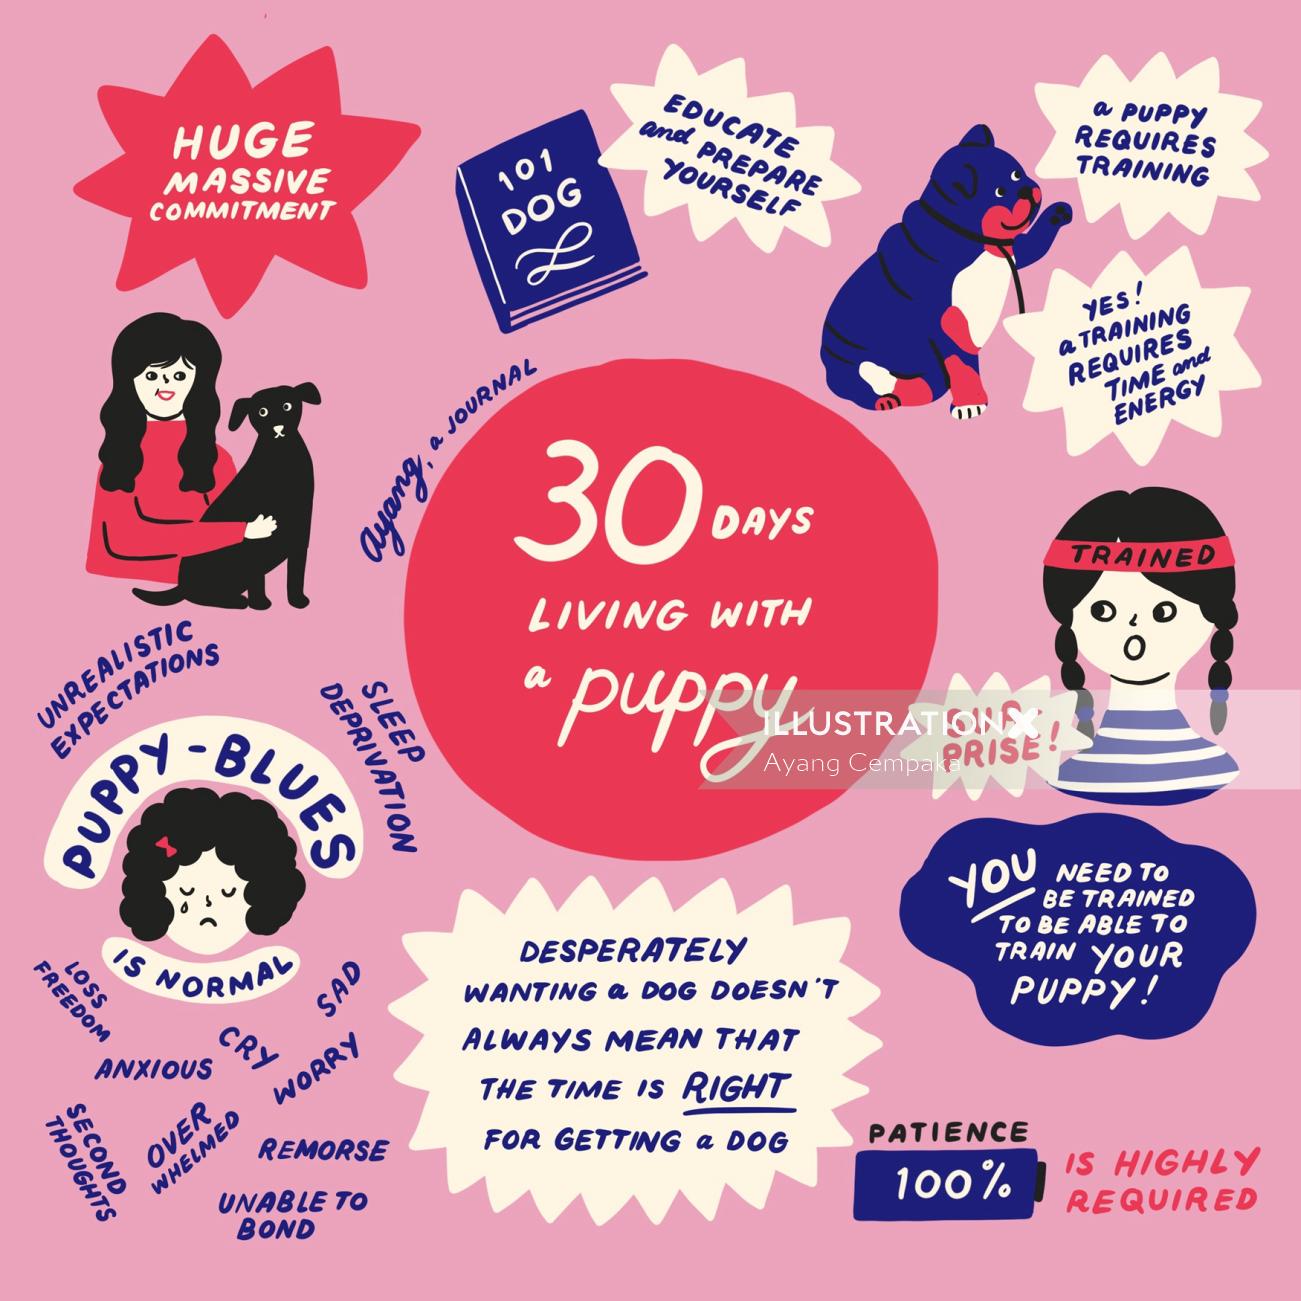 Book illustration on "30 Days Living with a Puppy"